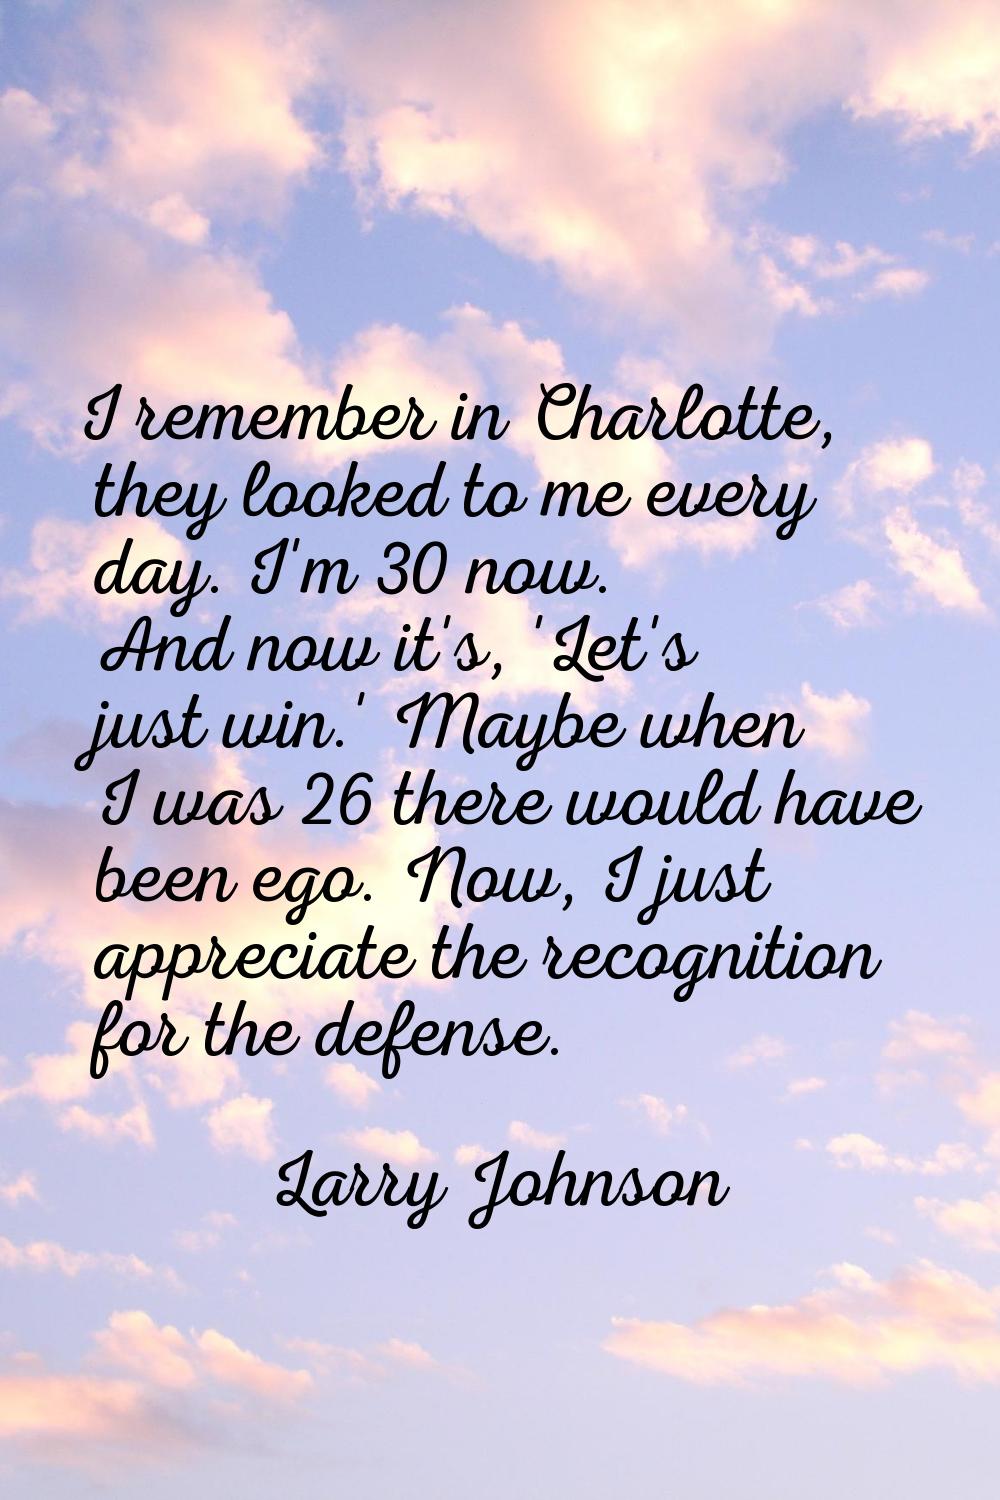 I remember in Charlotte, they looked to me every day. I'm 30 now. And now it's, 'Let's just win.' M